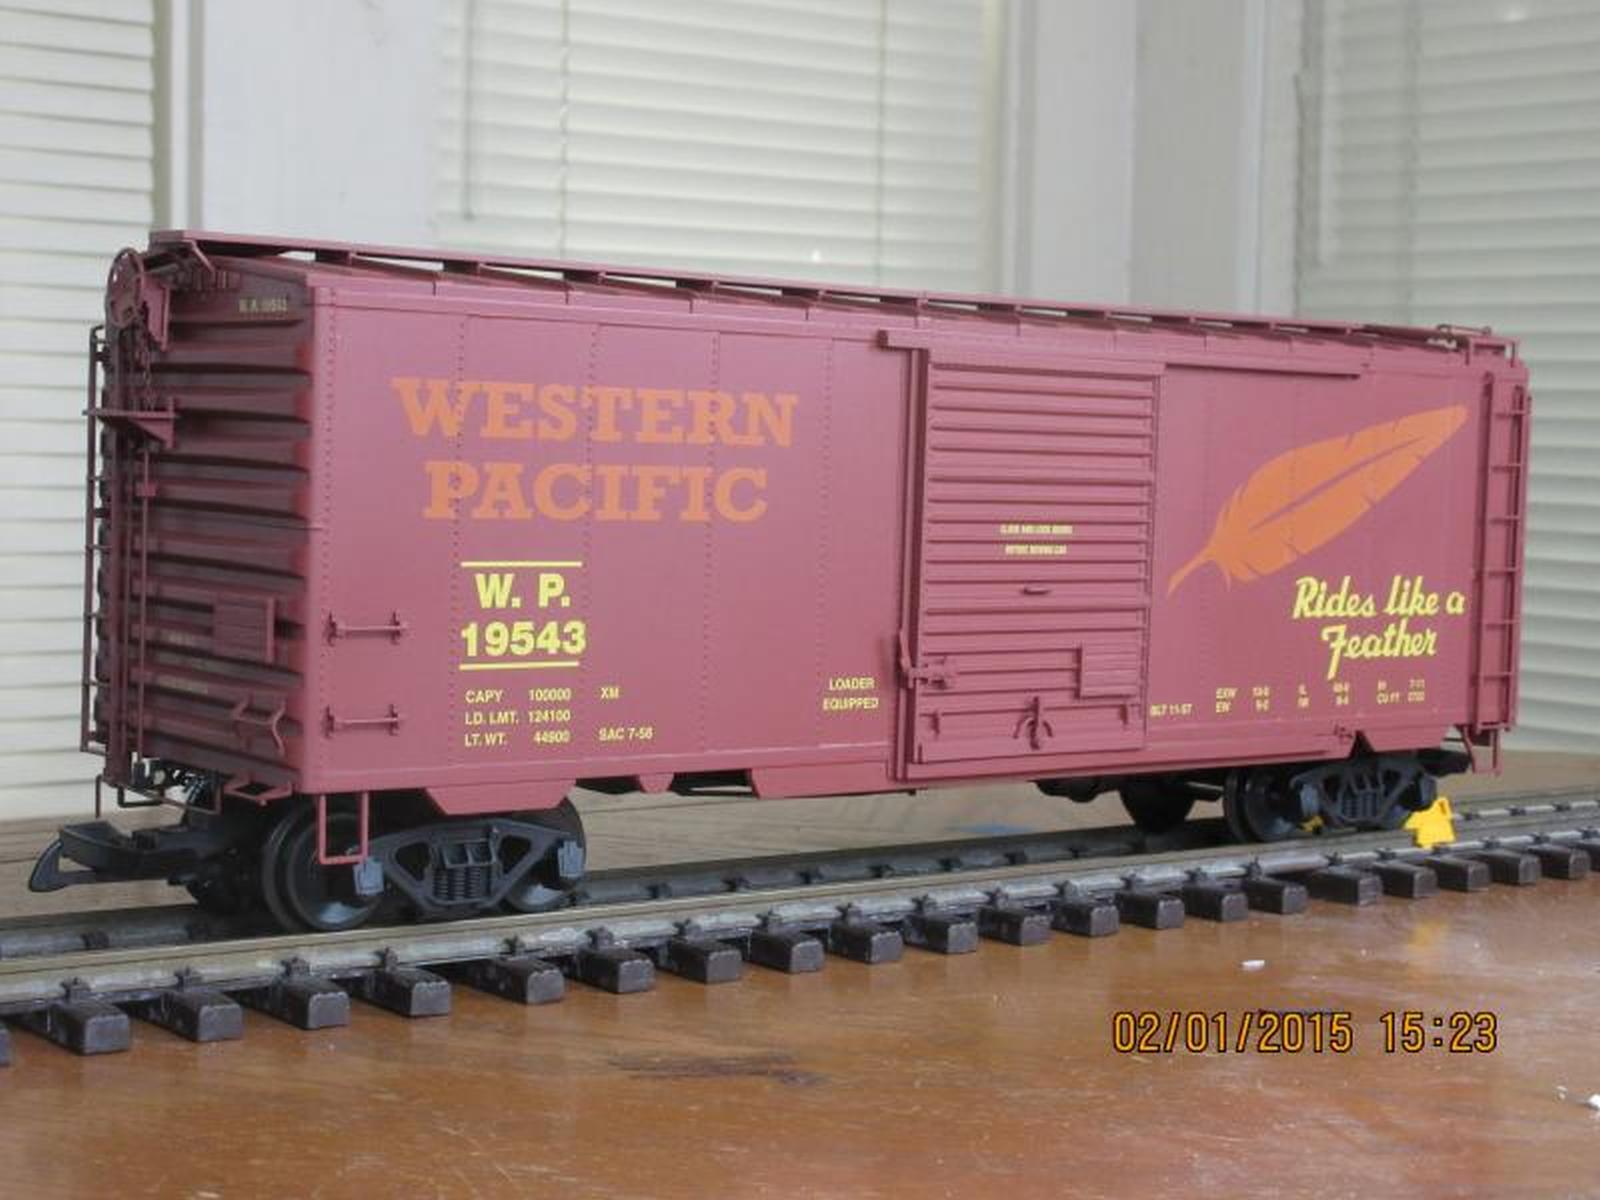 R19219C Western Pacific #WP 19543